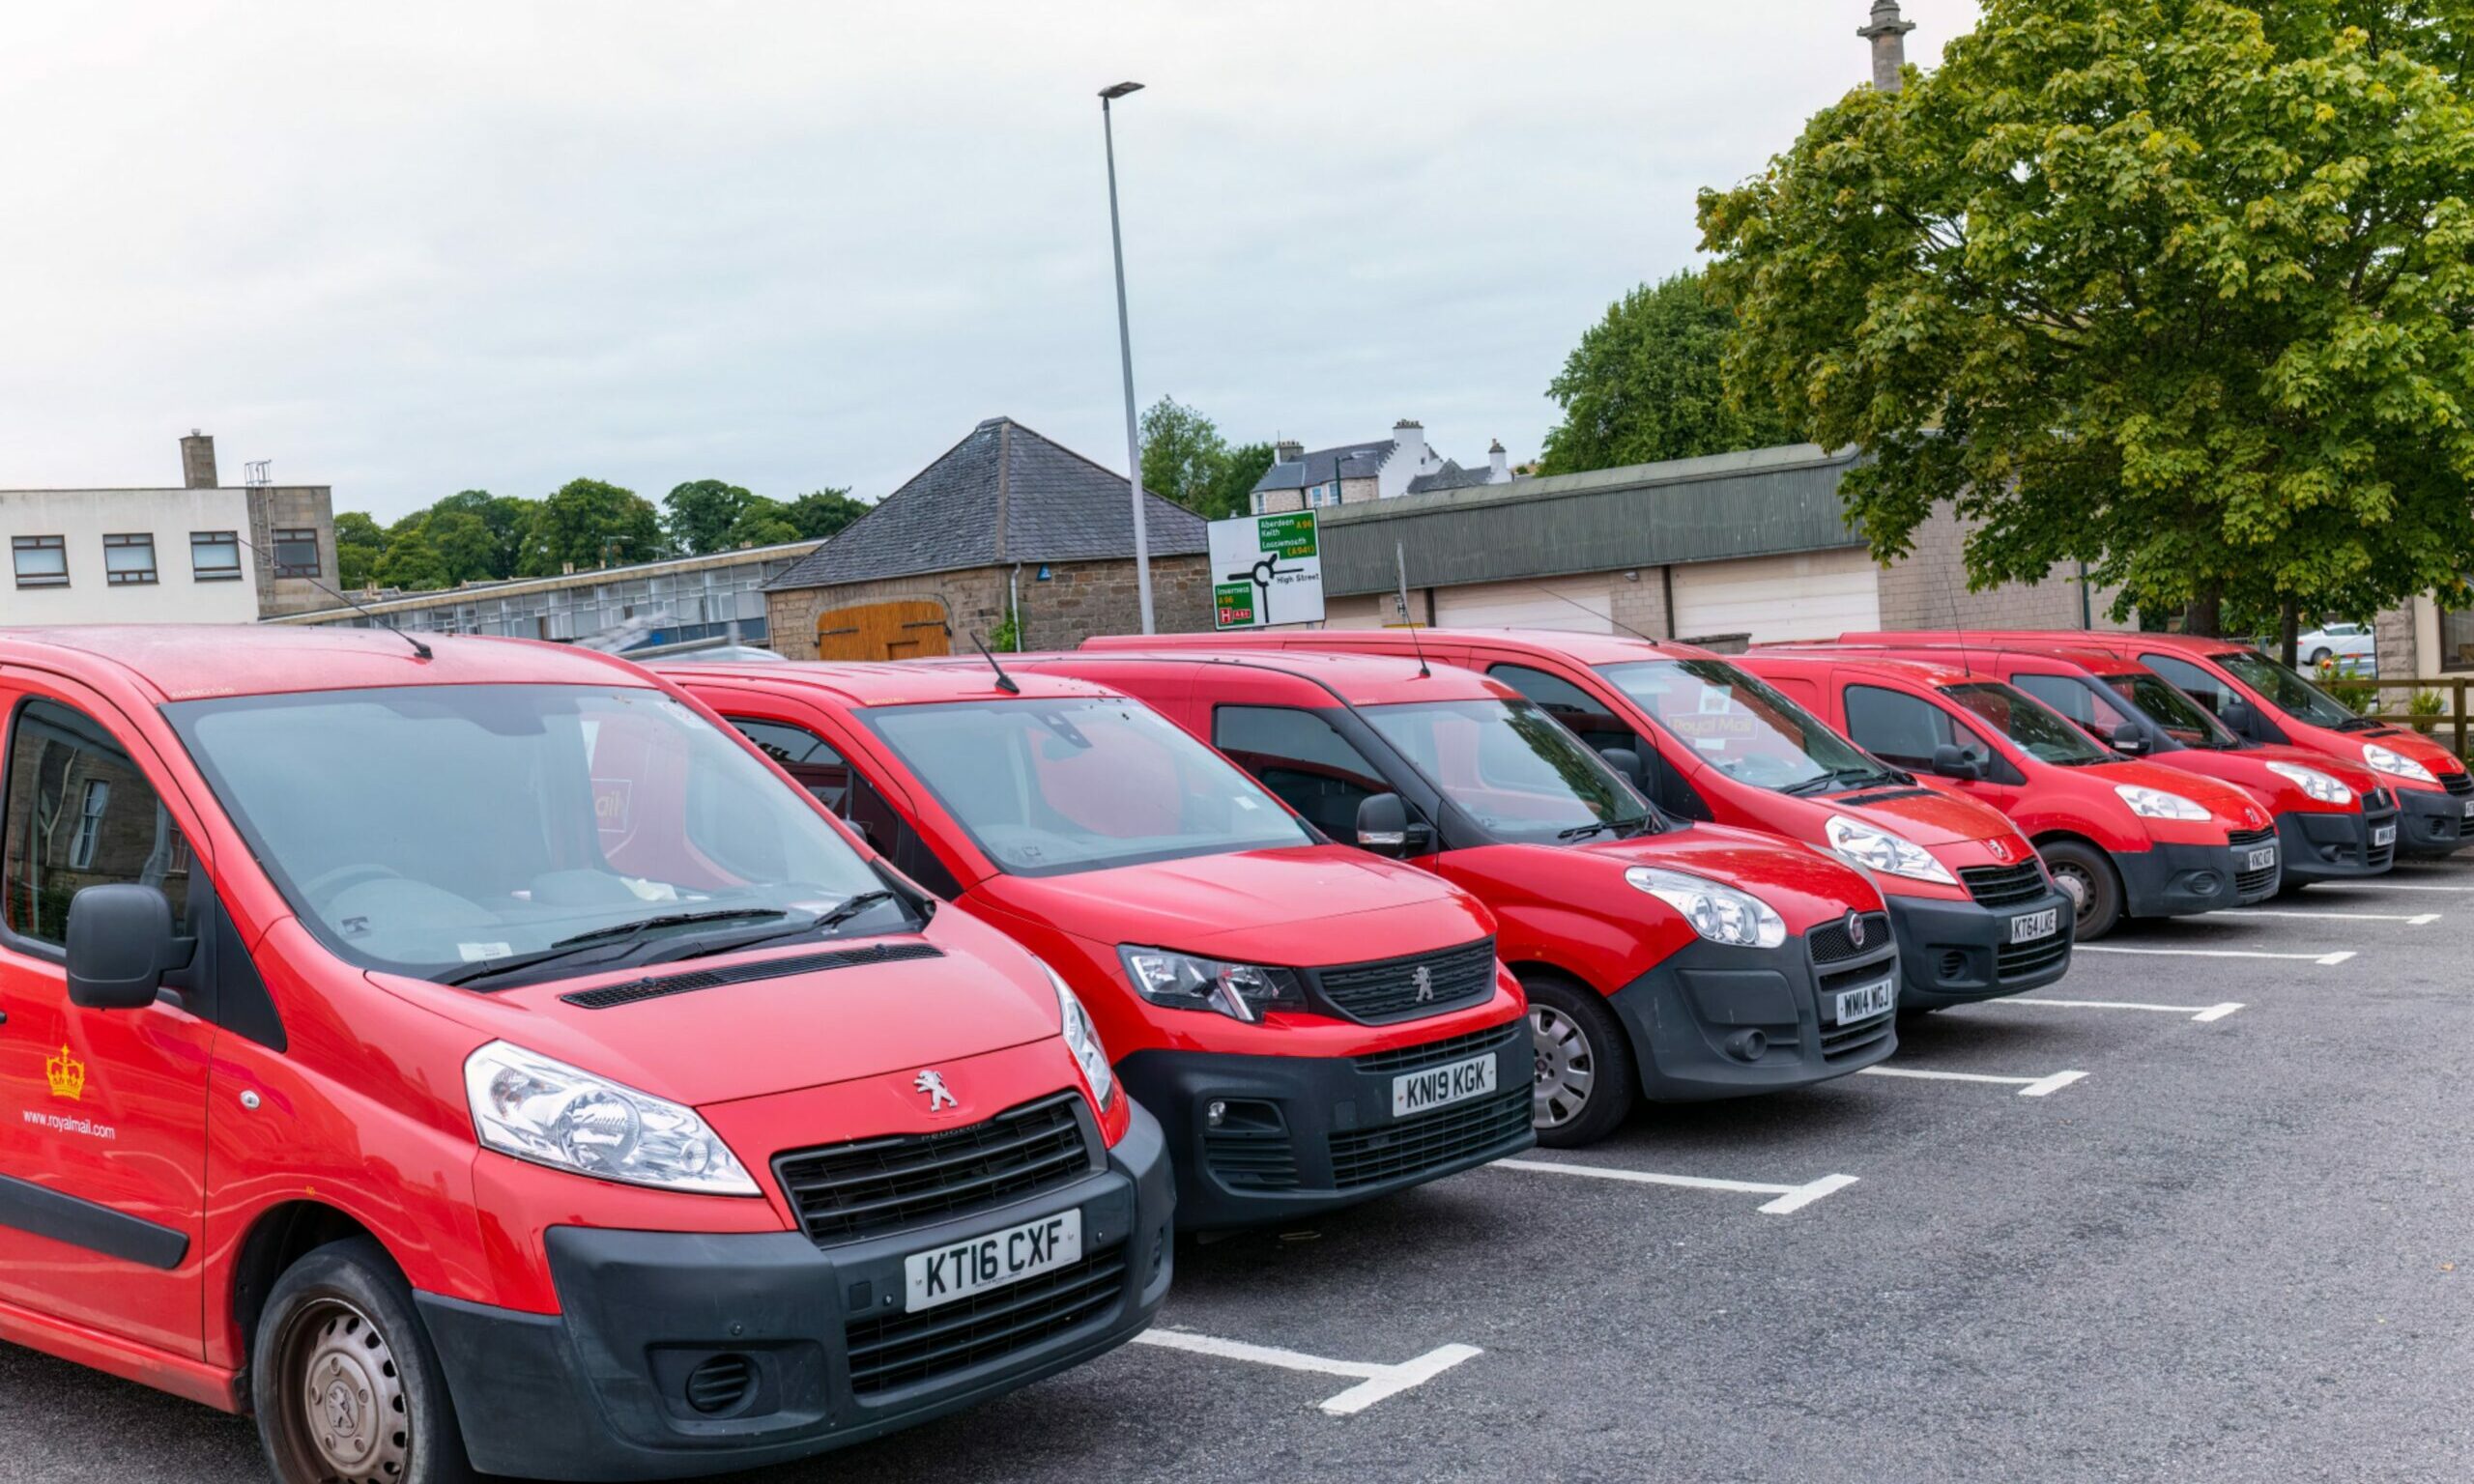 Front of Royal Mail vans in Elgin lined up in a car park. 